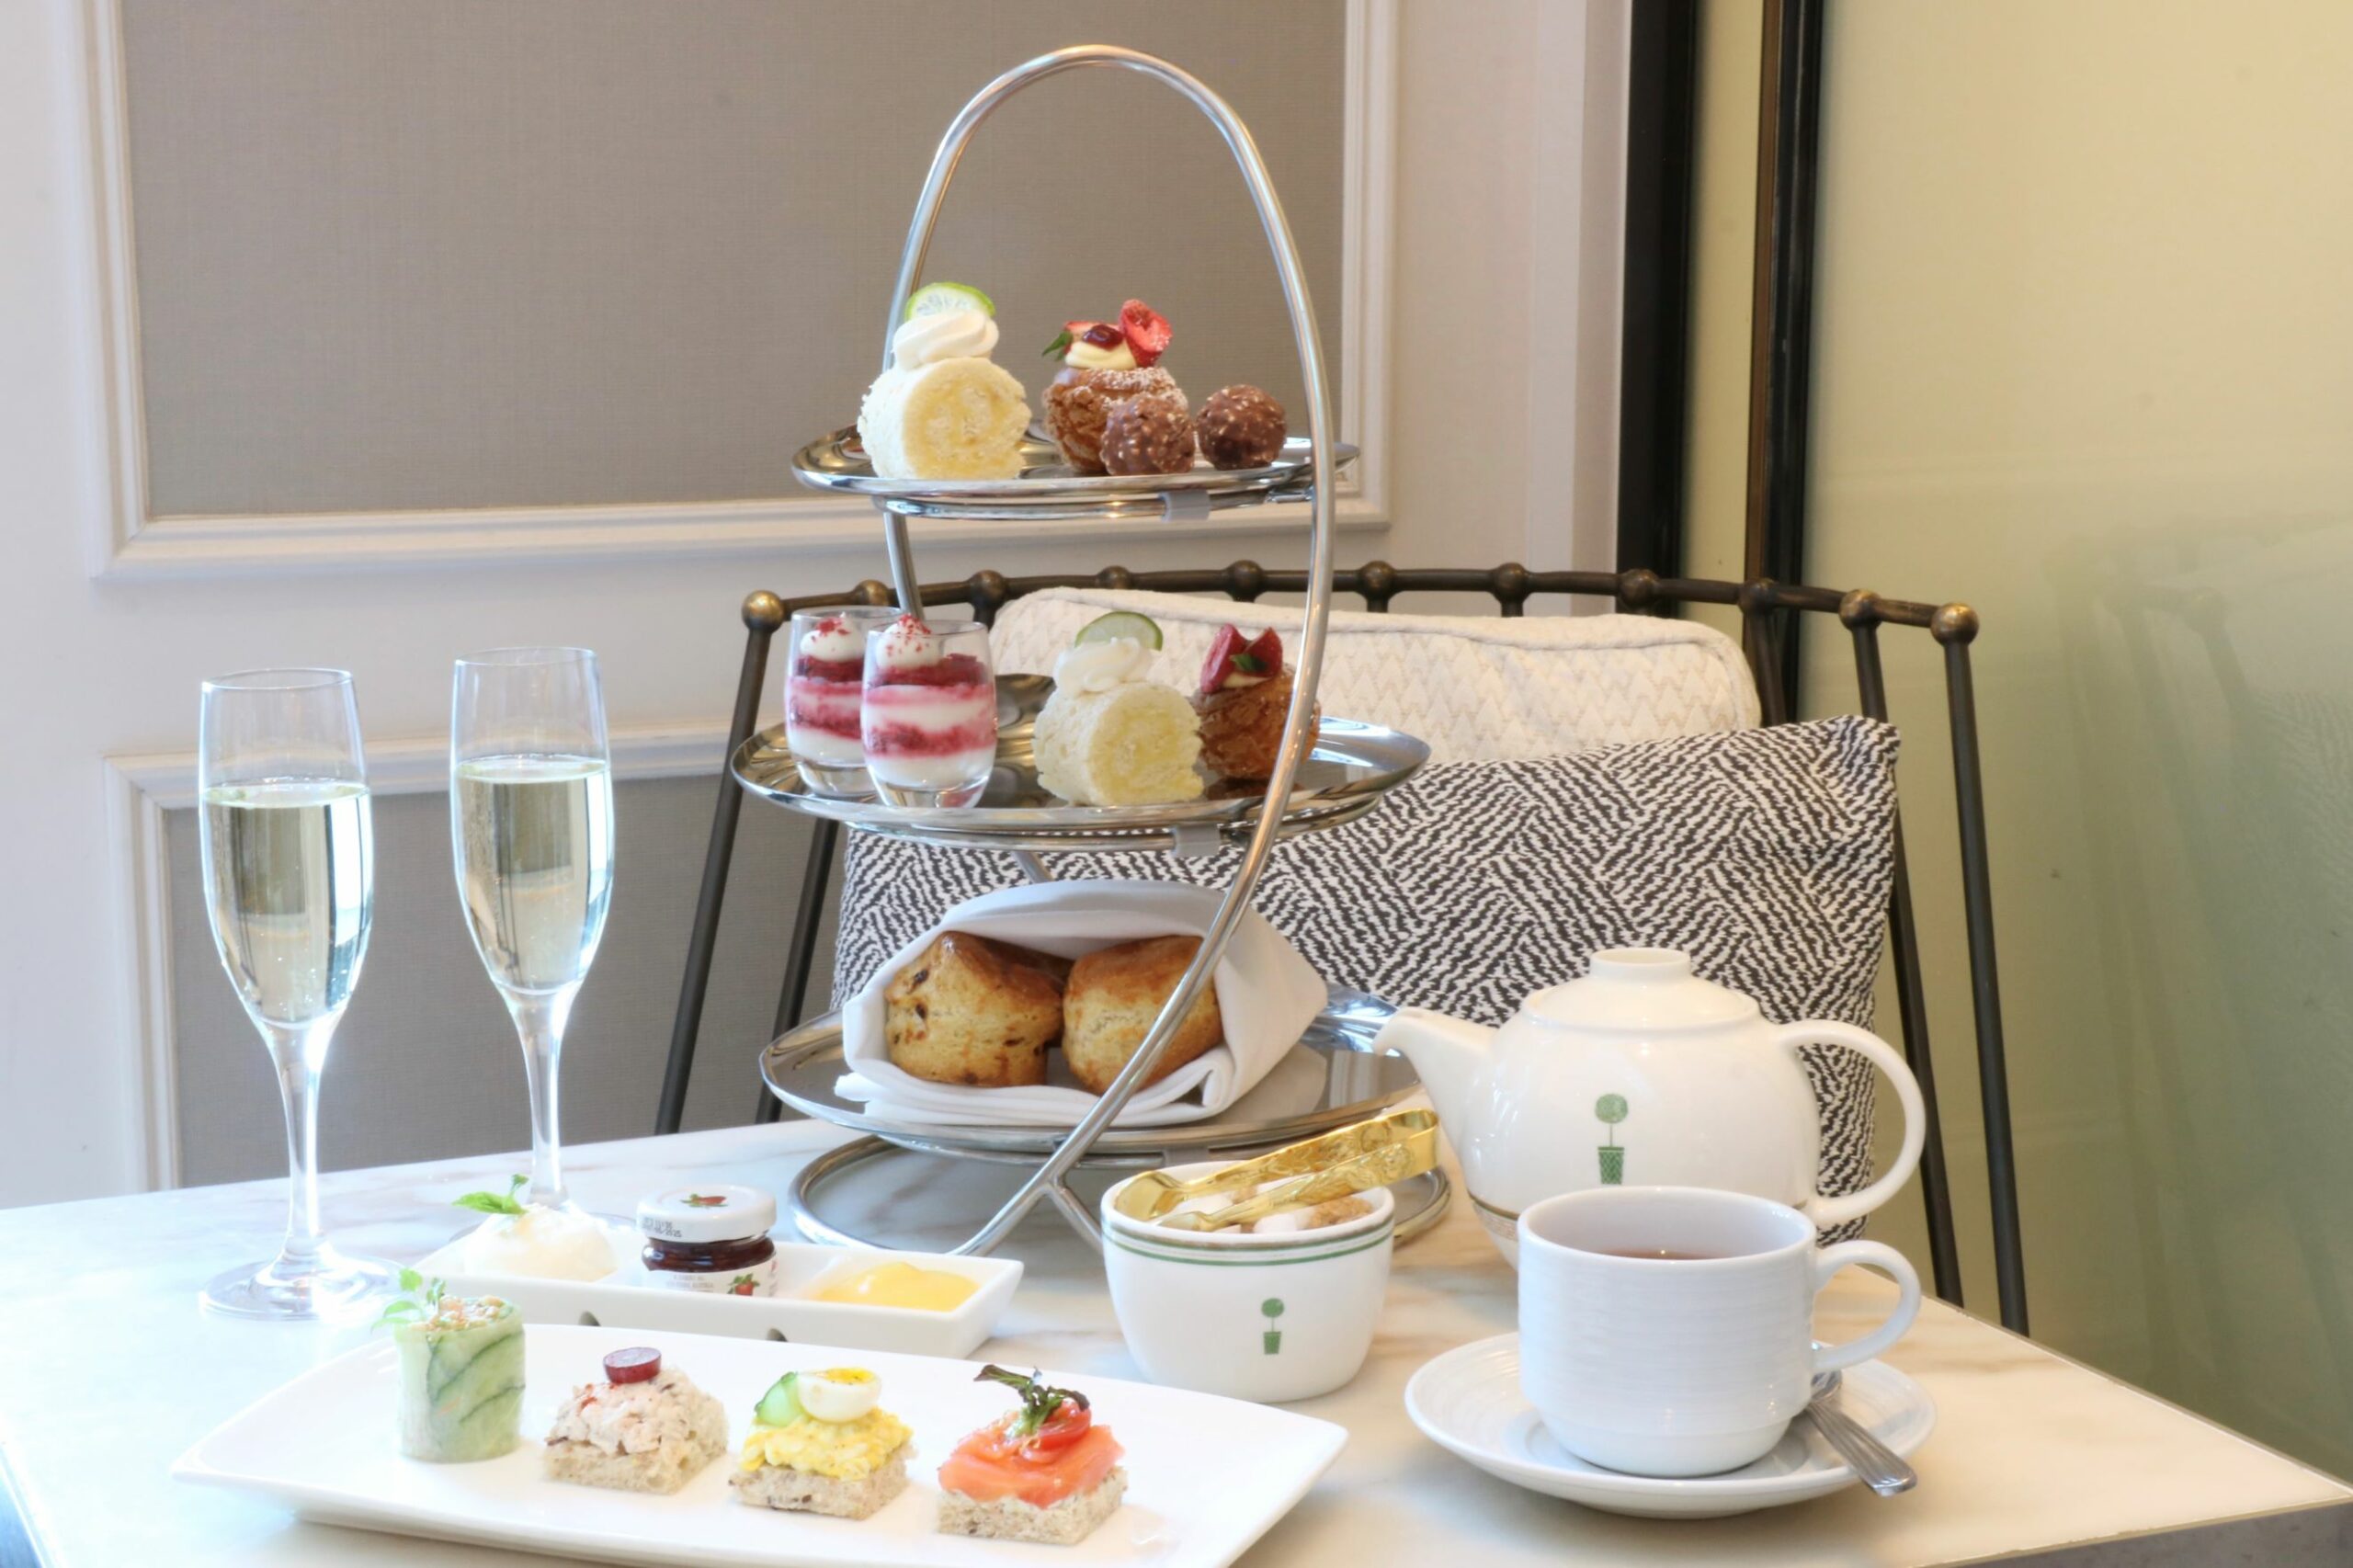 An image of the selectin of sweets, teas, and bubbly at the London's Valentine's themed high tea.